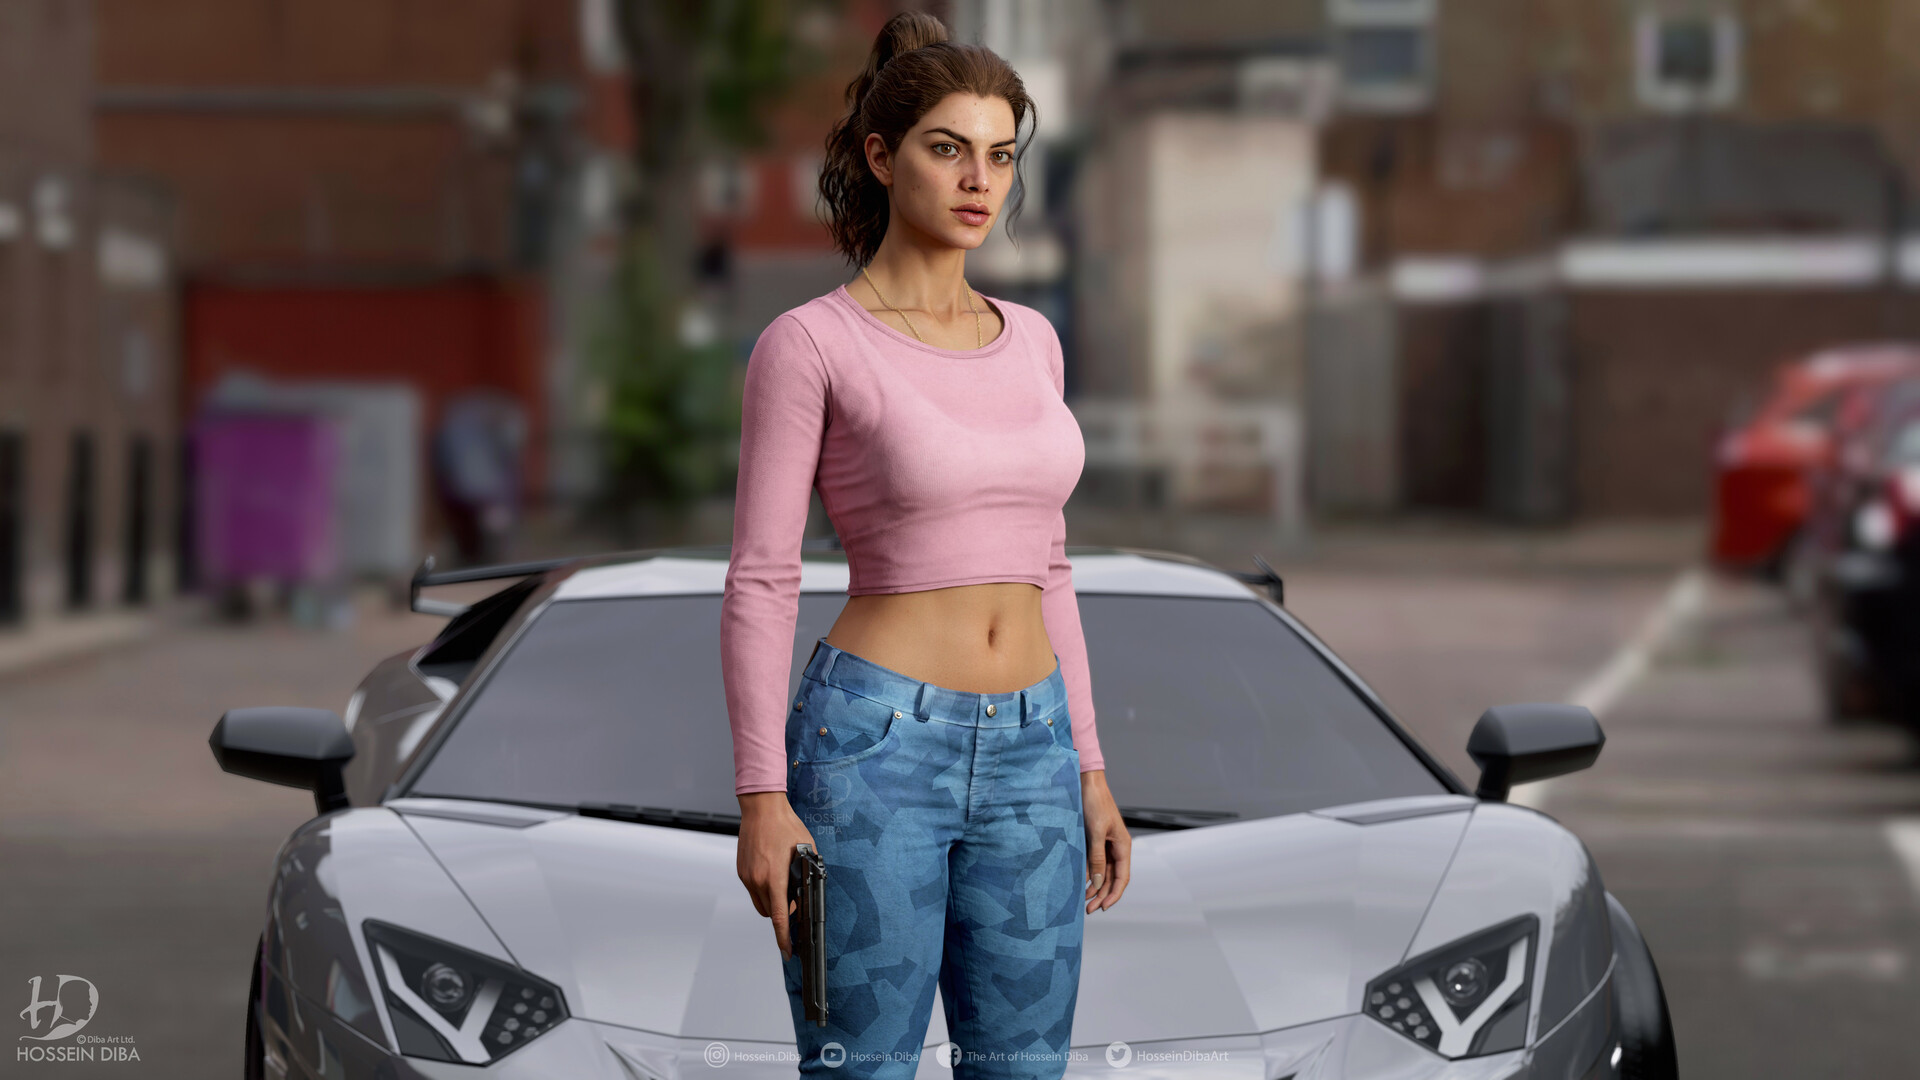 These GTA 6 Lucia Mods Add Rockstar's Female Protagonist to GTA 5 and San  Andreas